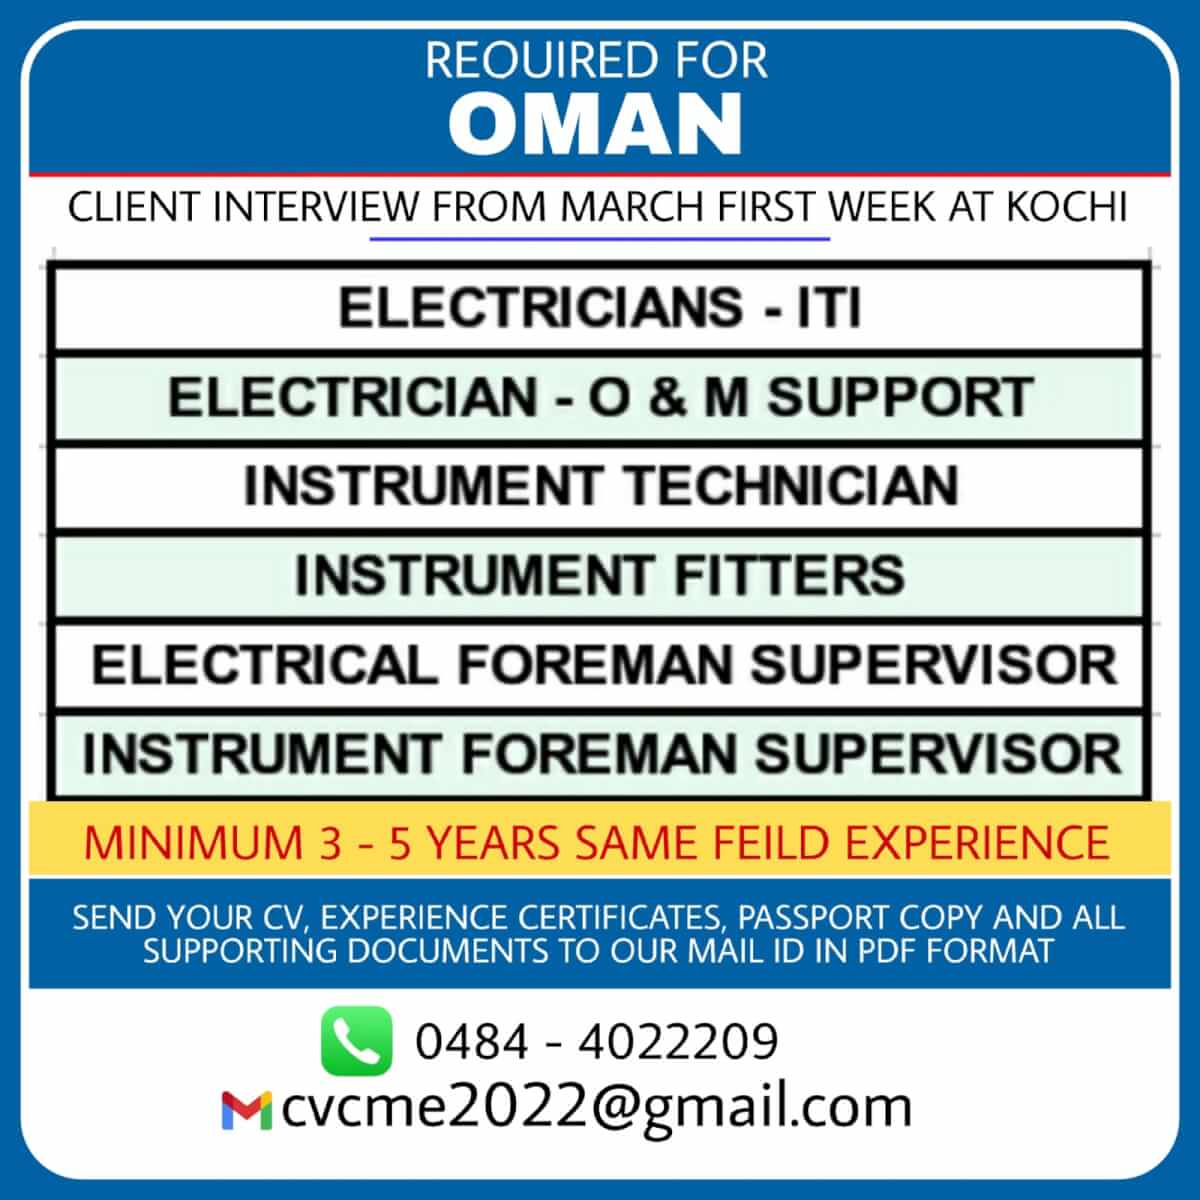 Jobs For Oman Today